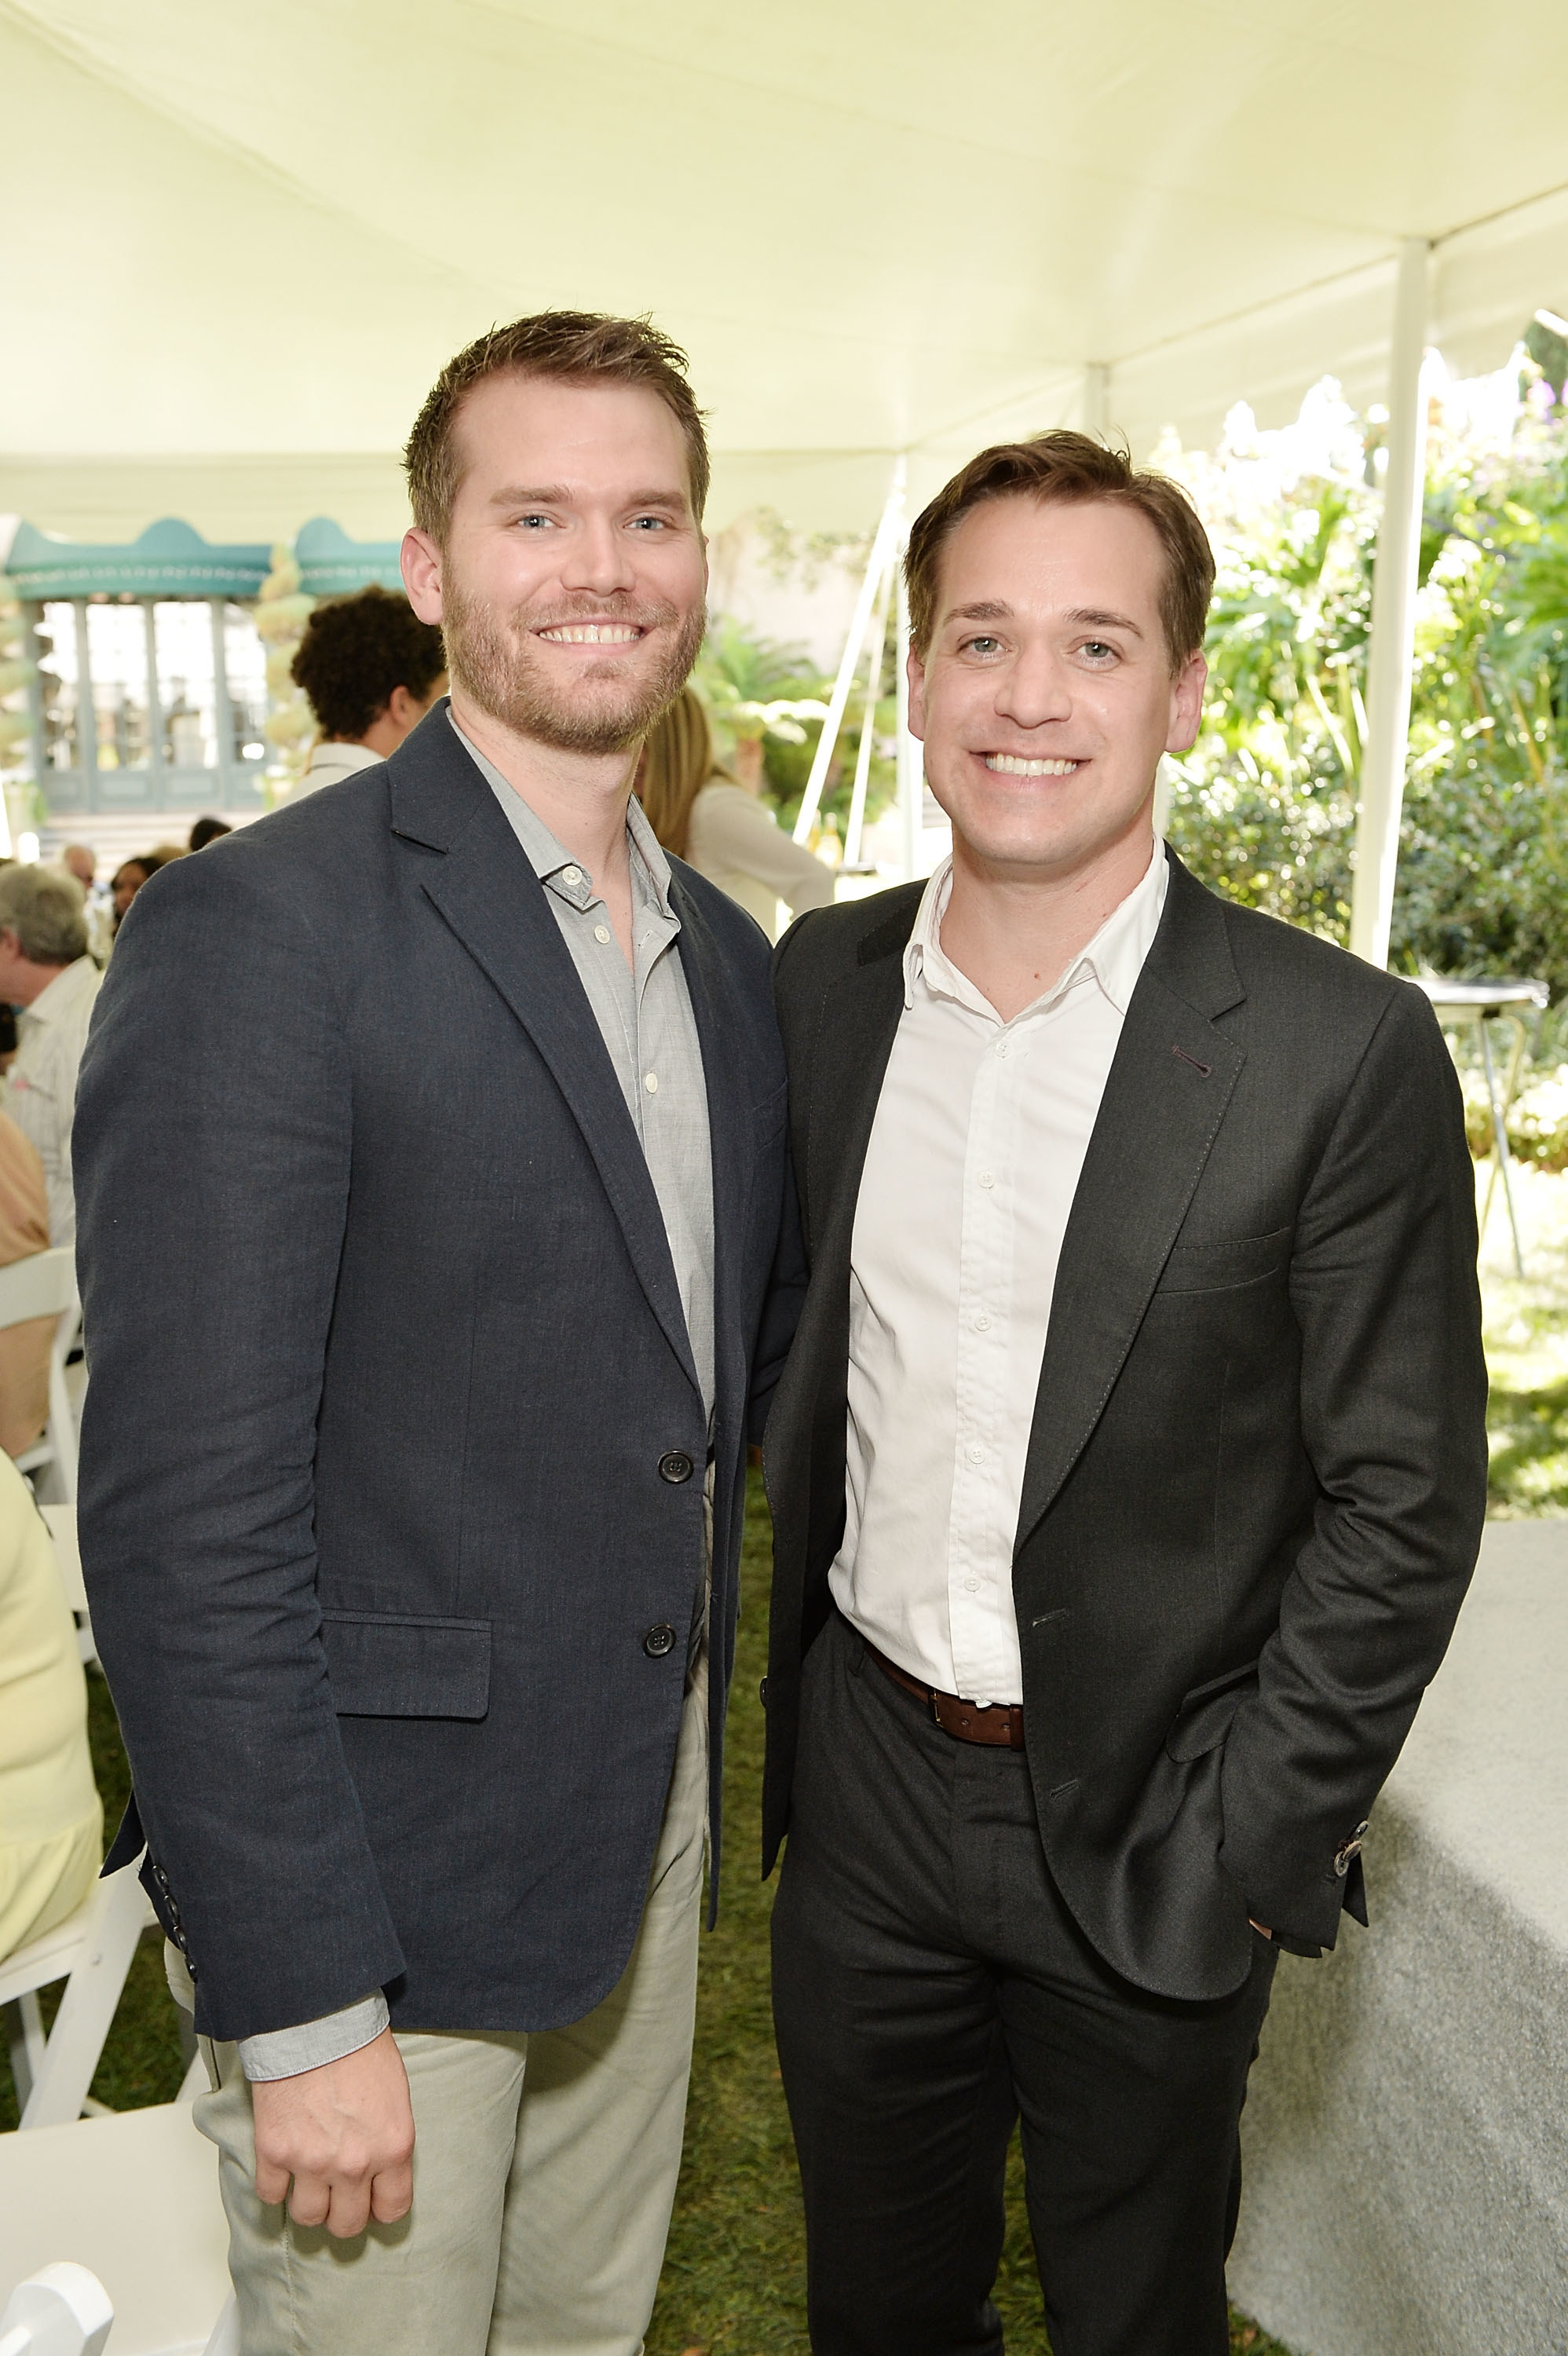 Patrick Leahy and TR Knight at an outdoor event